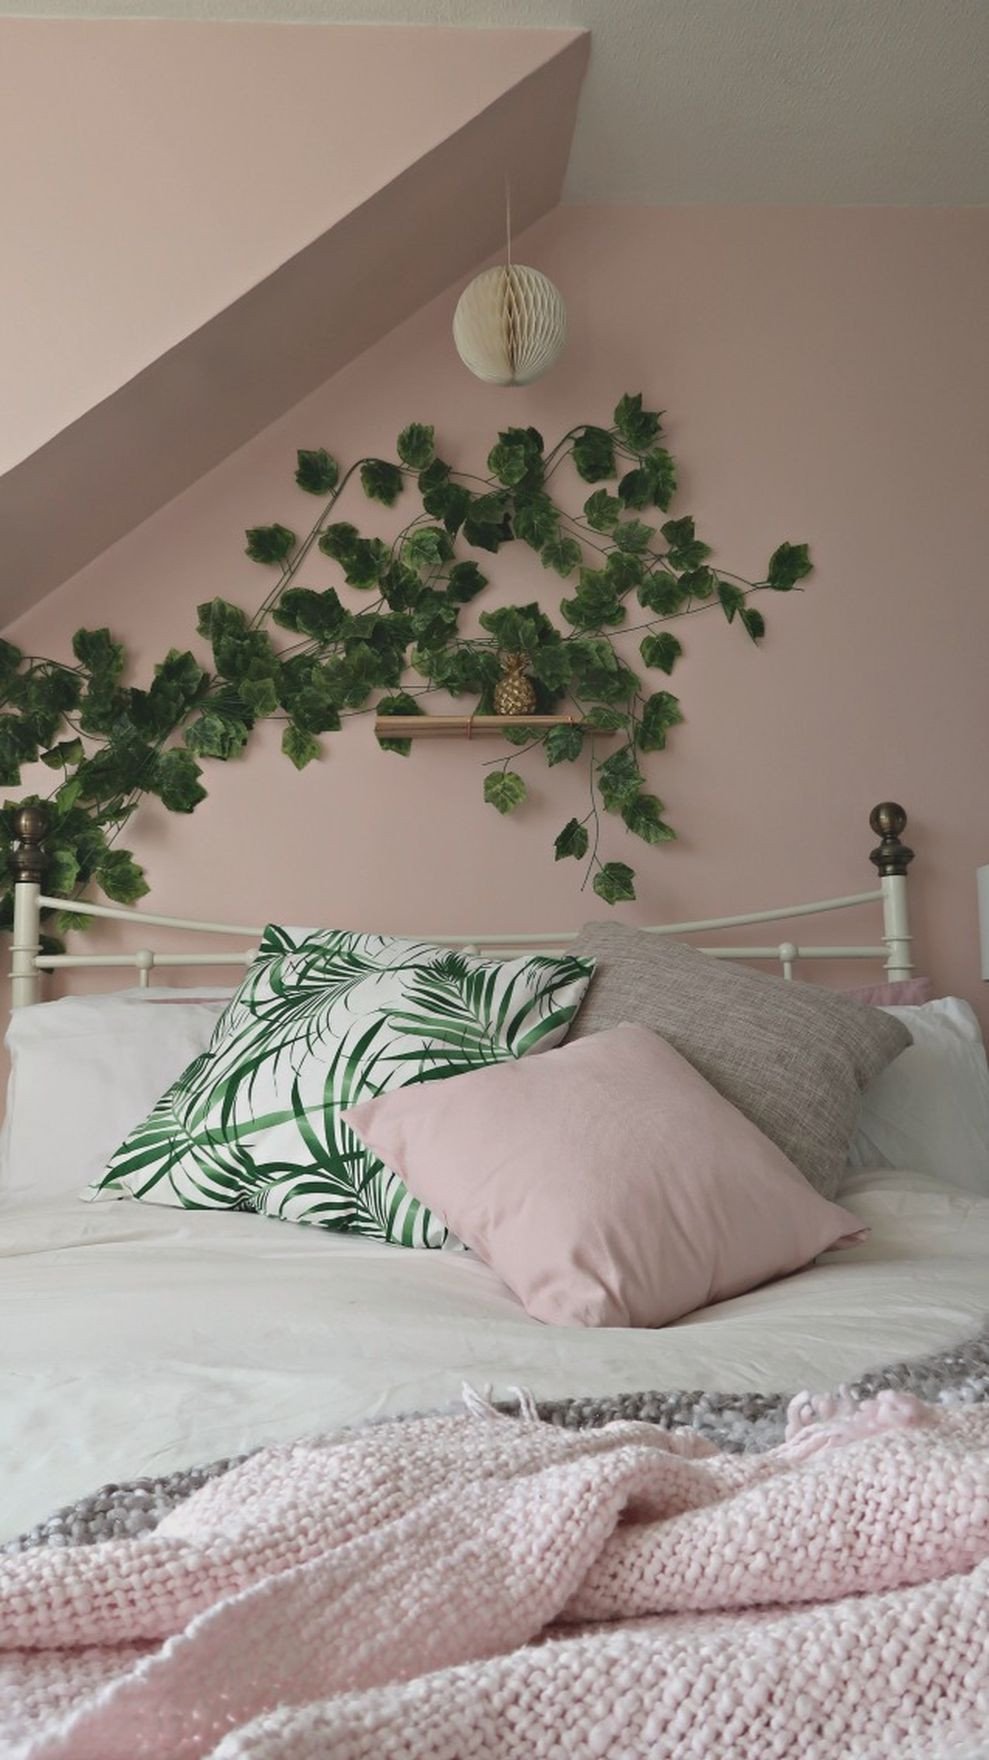 Pink and White Bedroom Awesome 86 Cute Bedroom Design Ideas with Pink and Green Walls